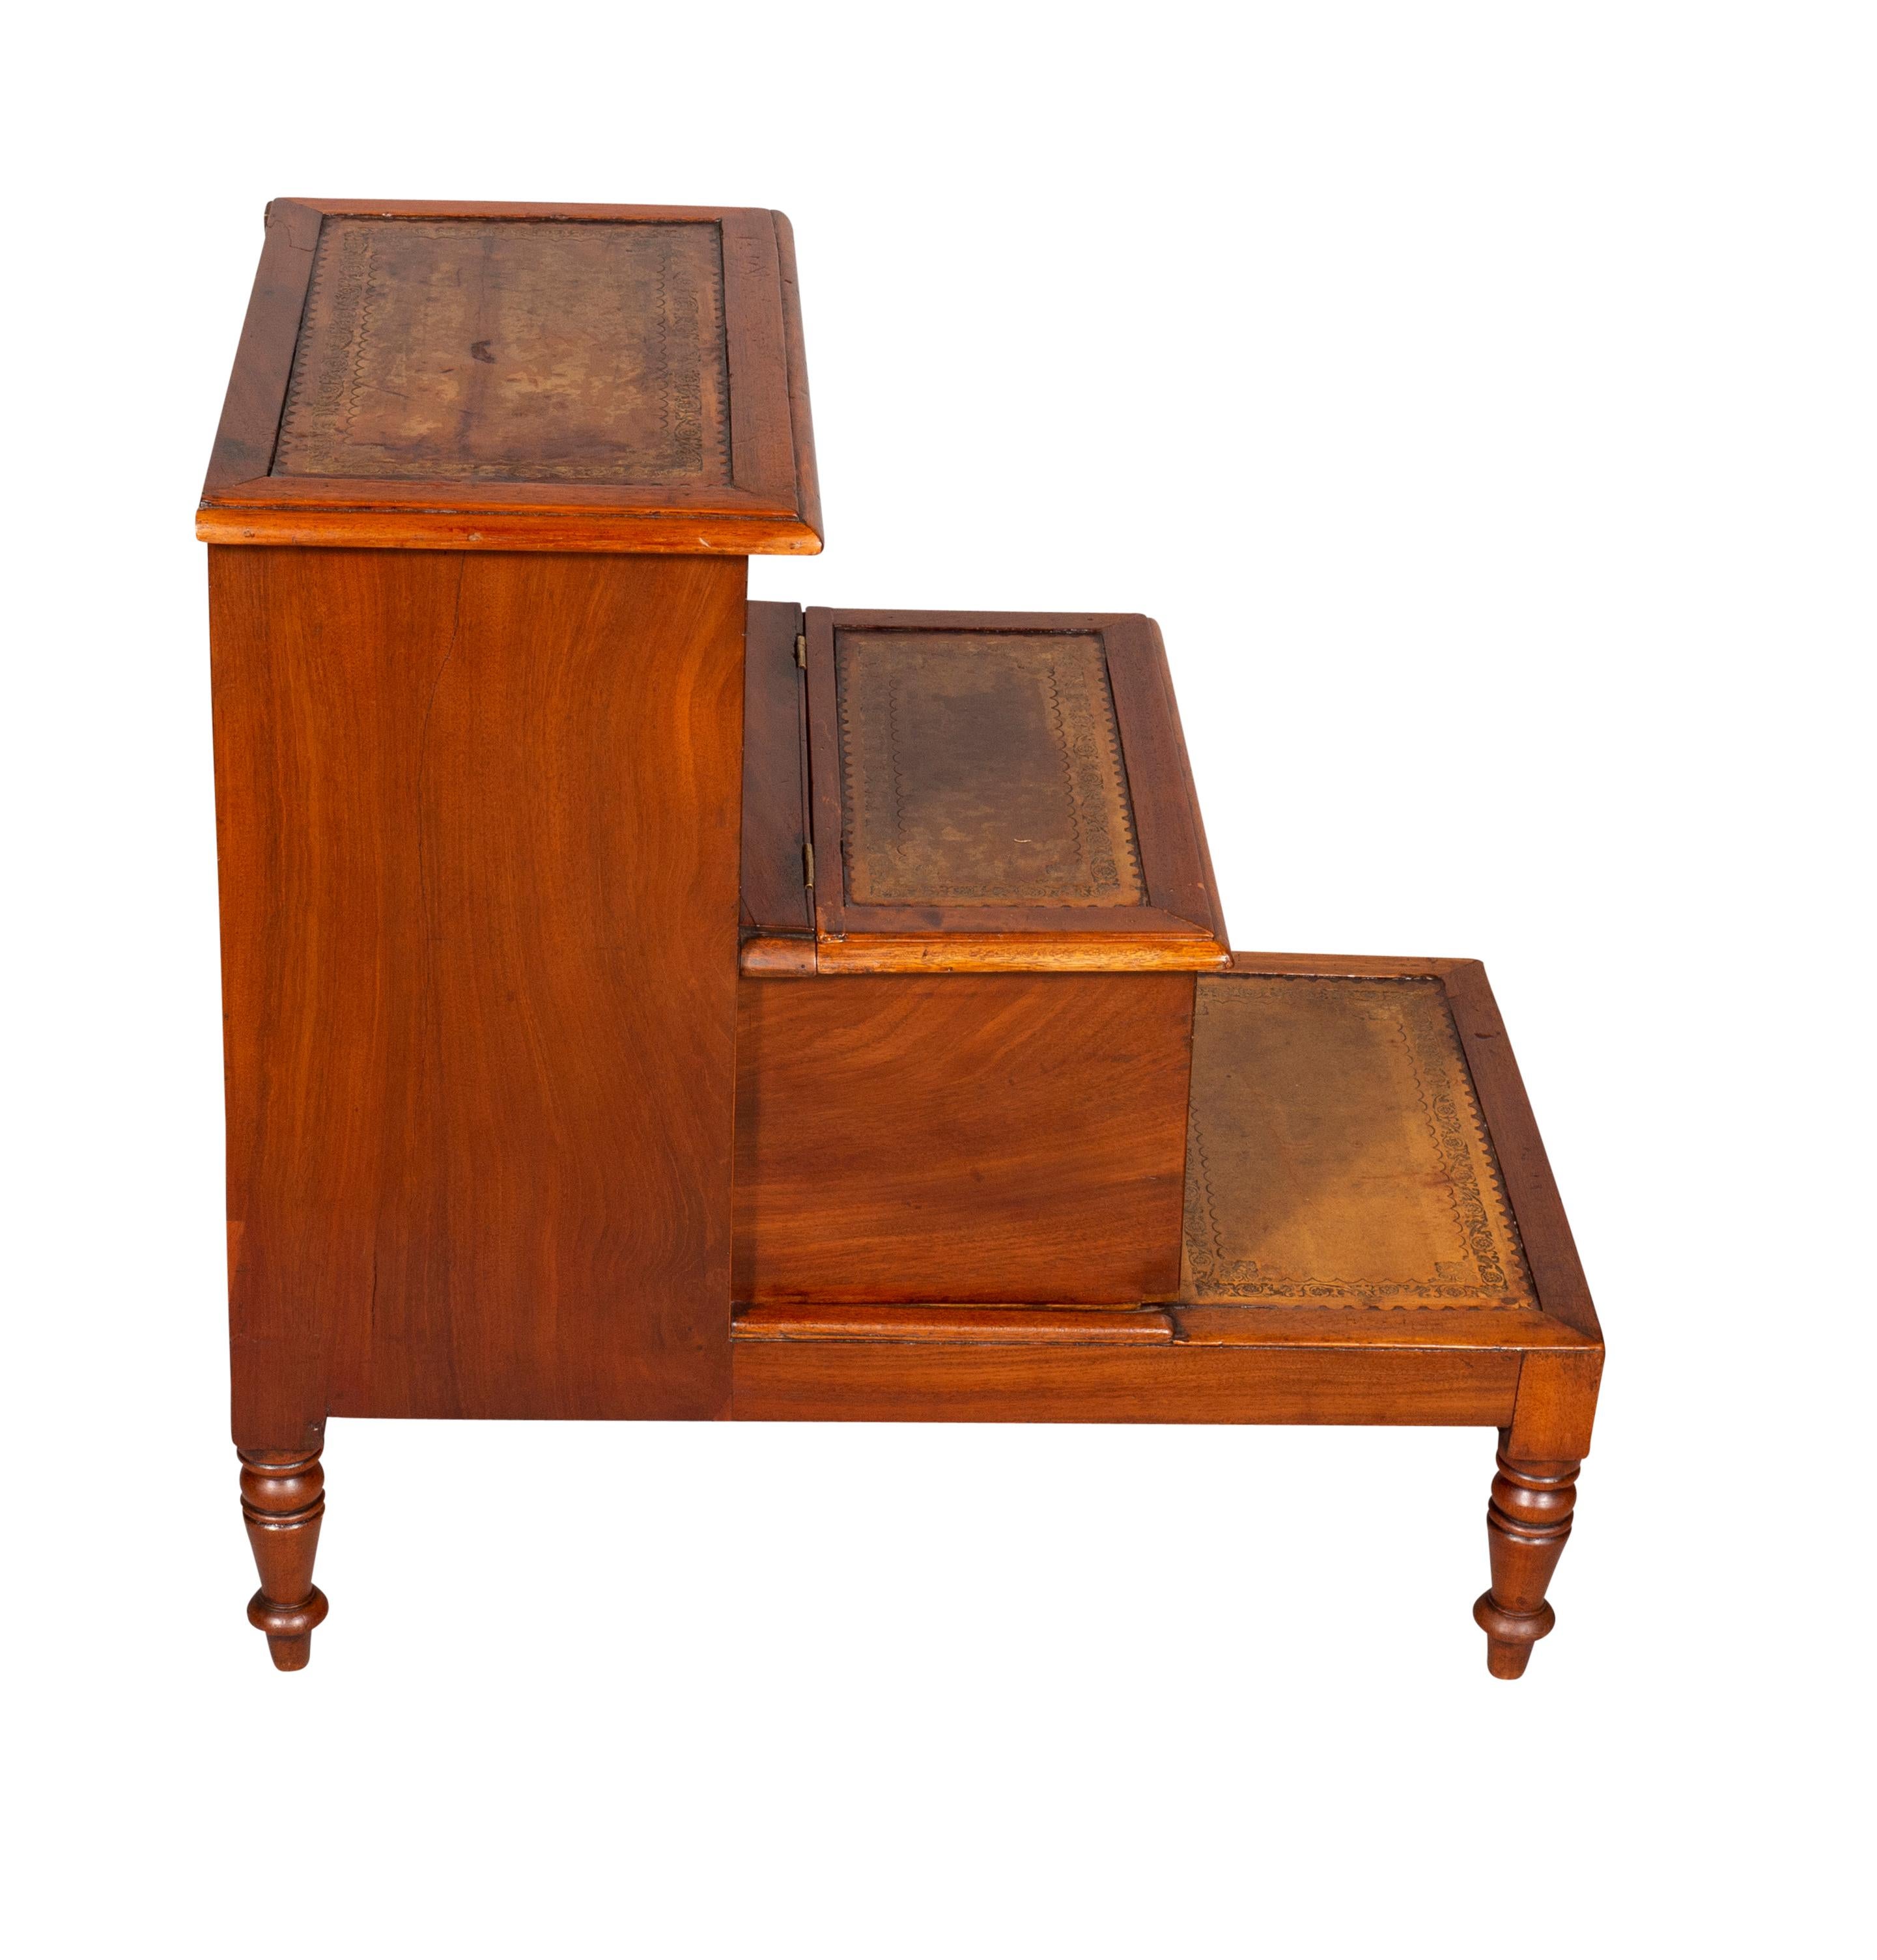 Early 19th Century Regency Mahogany Library or Bedside Steps